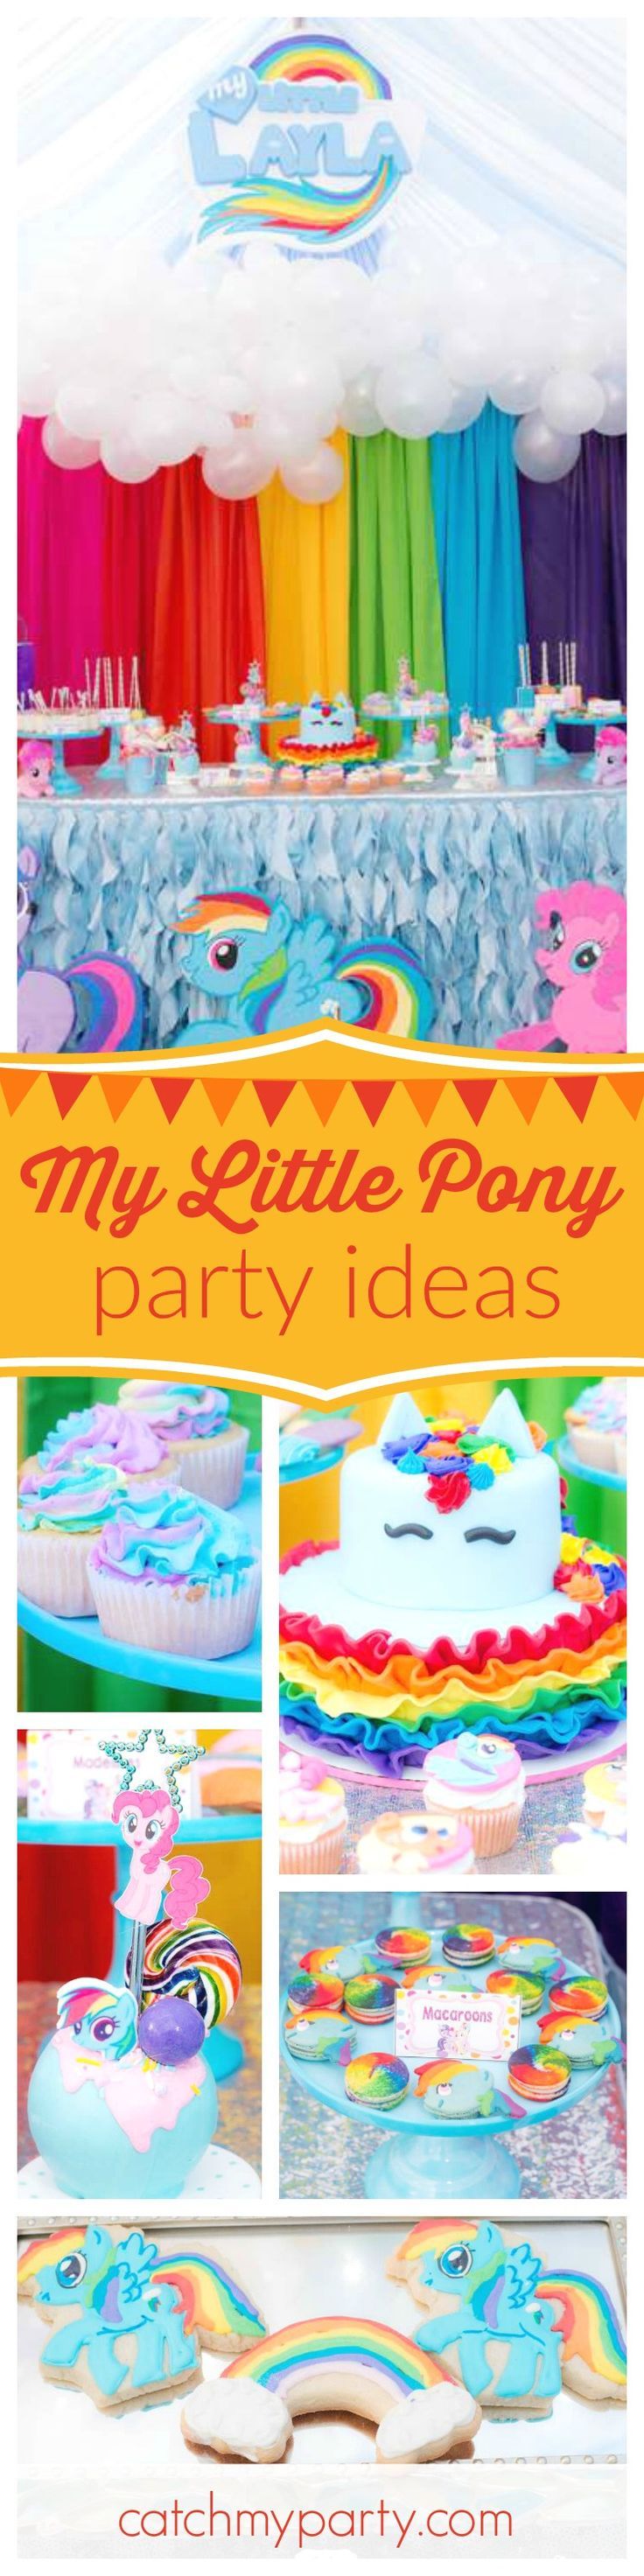 Dont miss this colorful My Little Pony birthday party The Rainbow Dash birthda